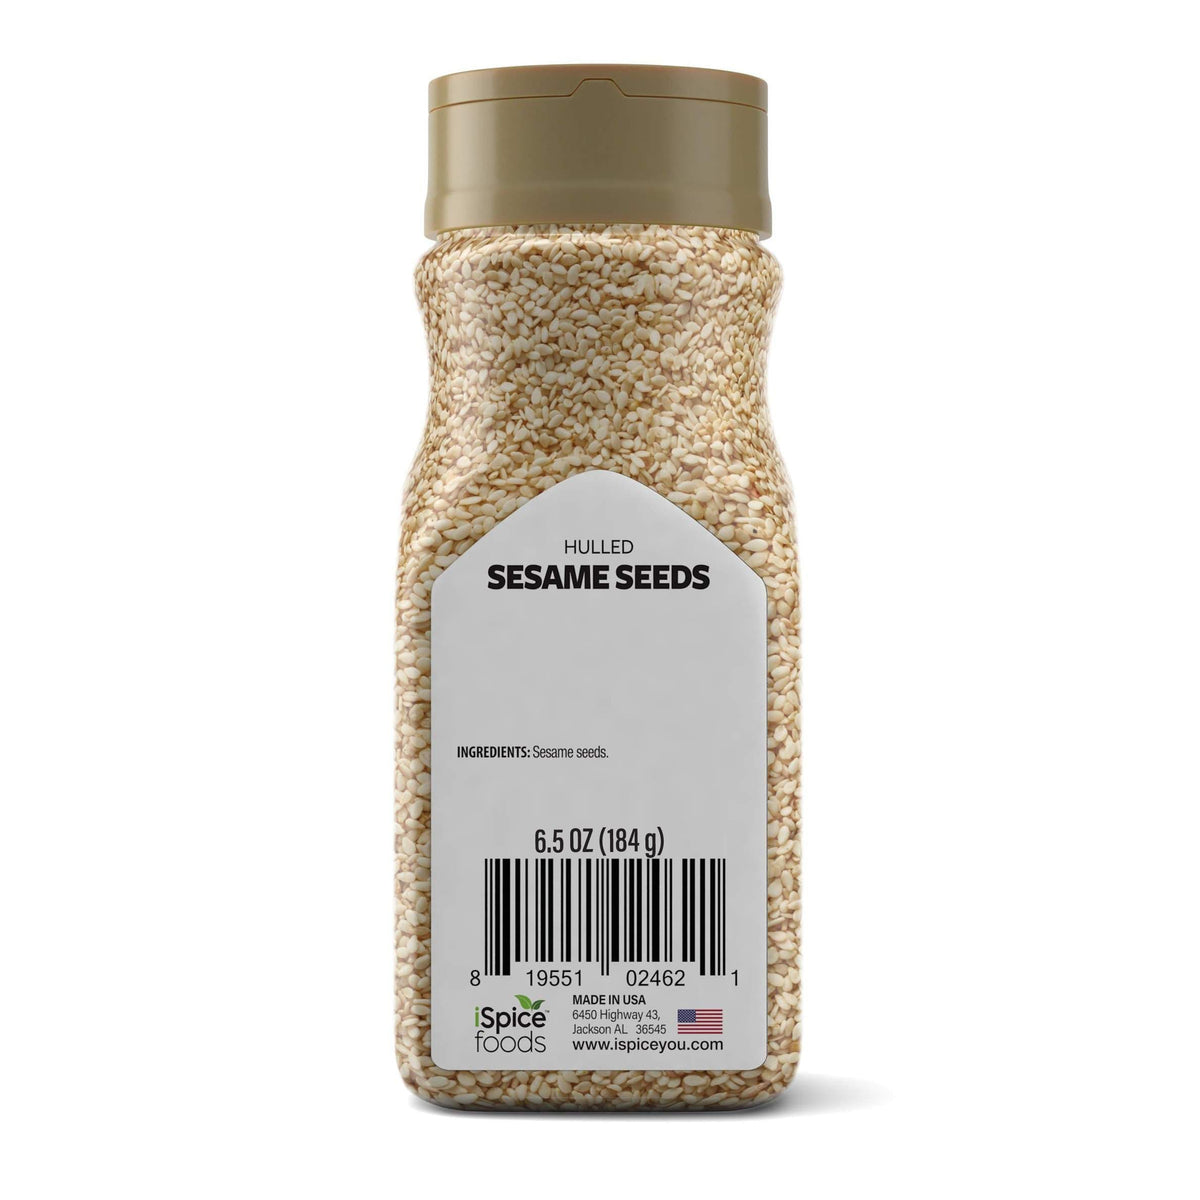 Get the Benefits of Hulled Sesame Seeds Today